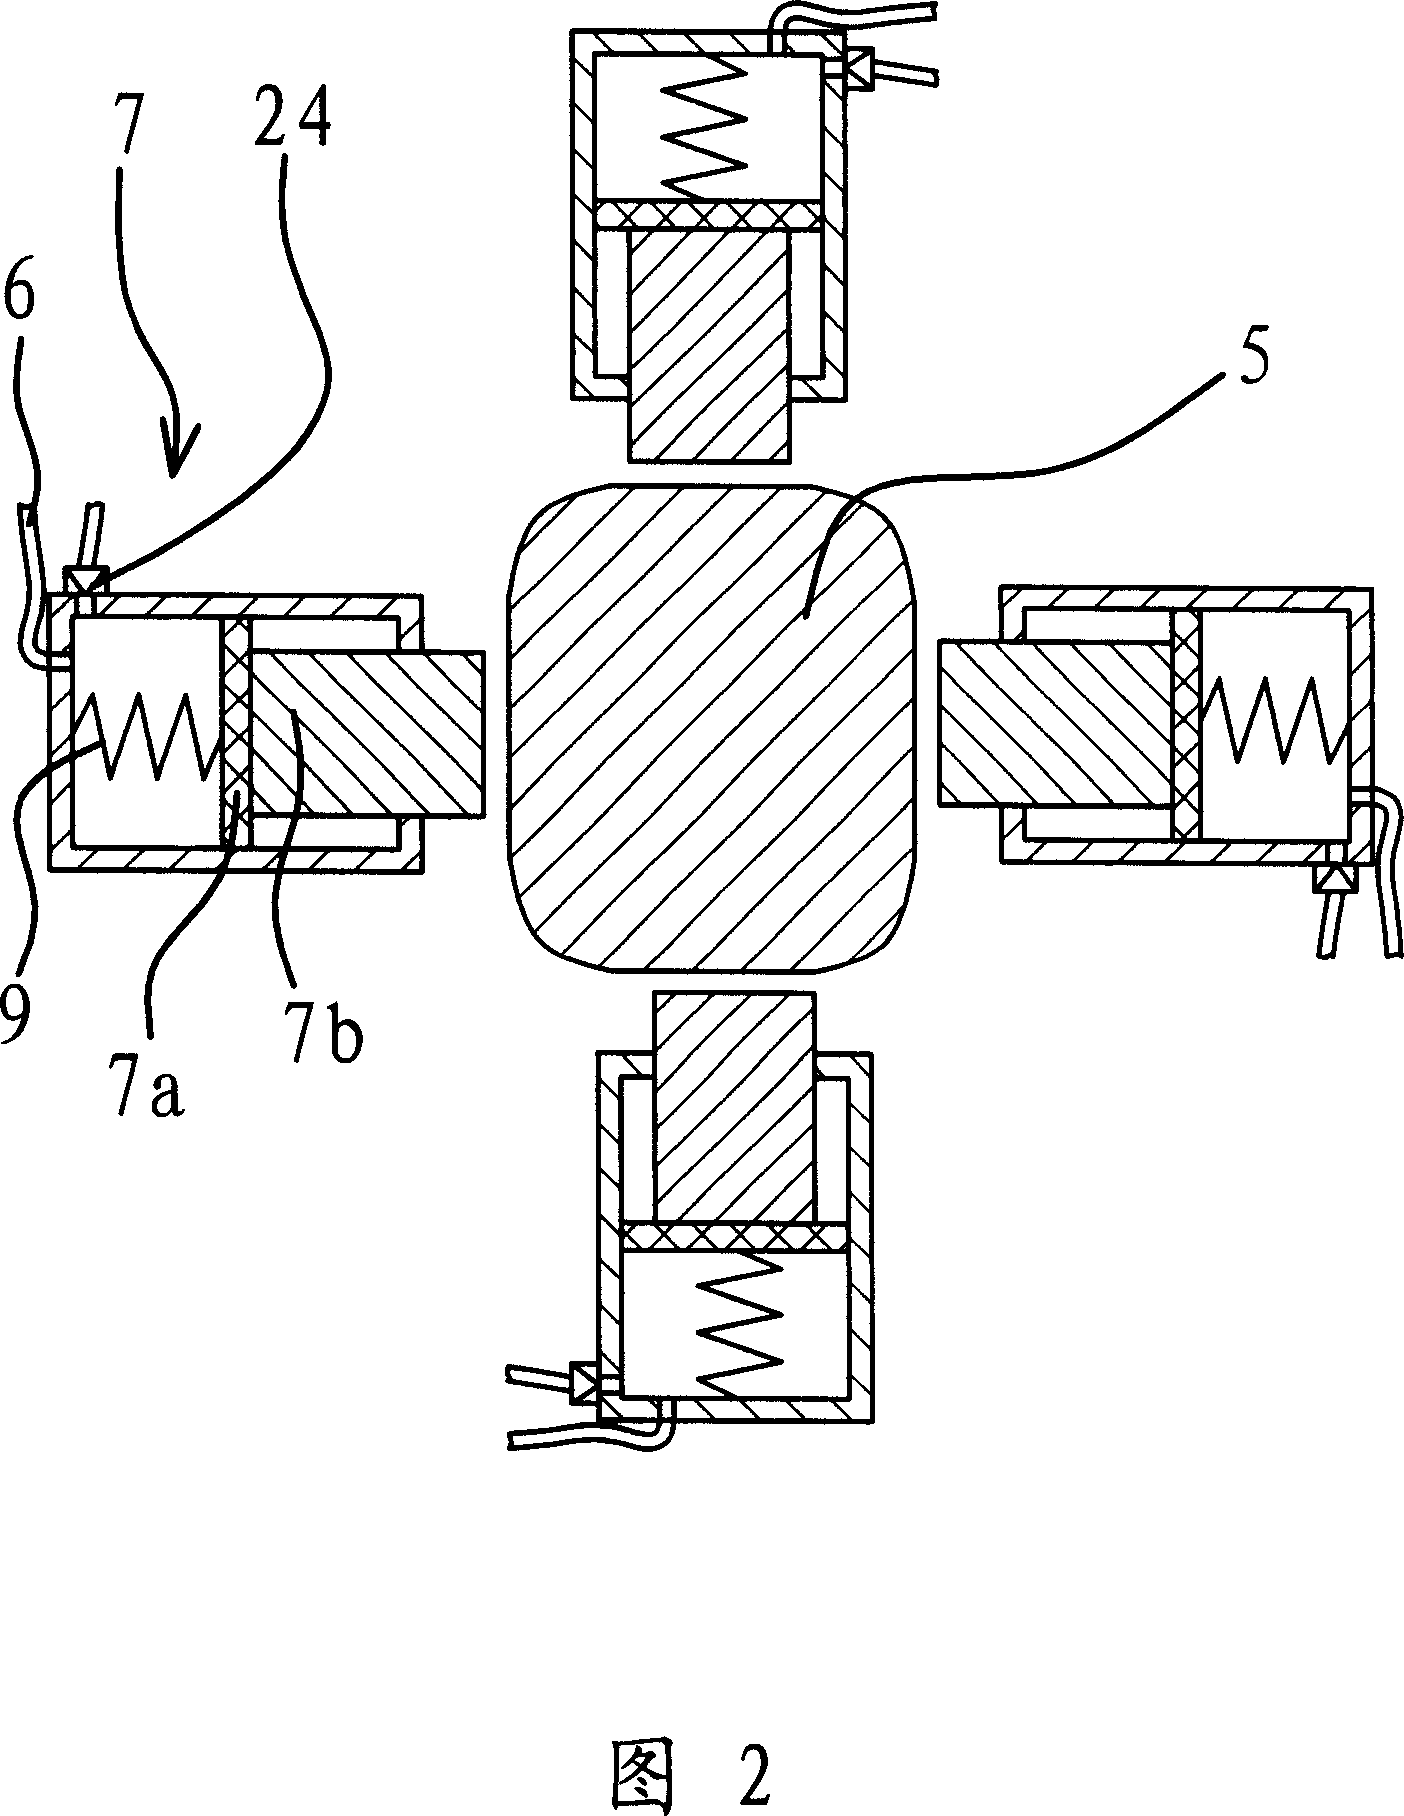 Sea wave electricity generating device